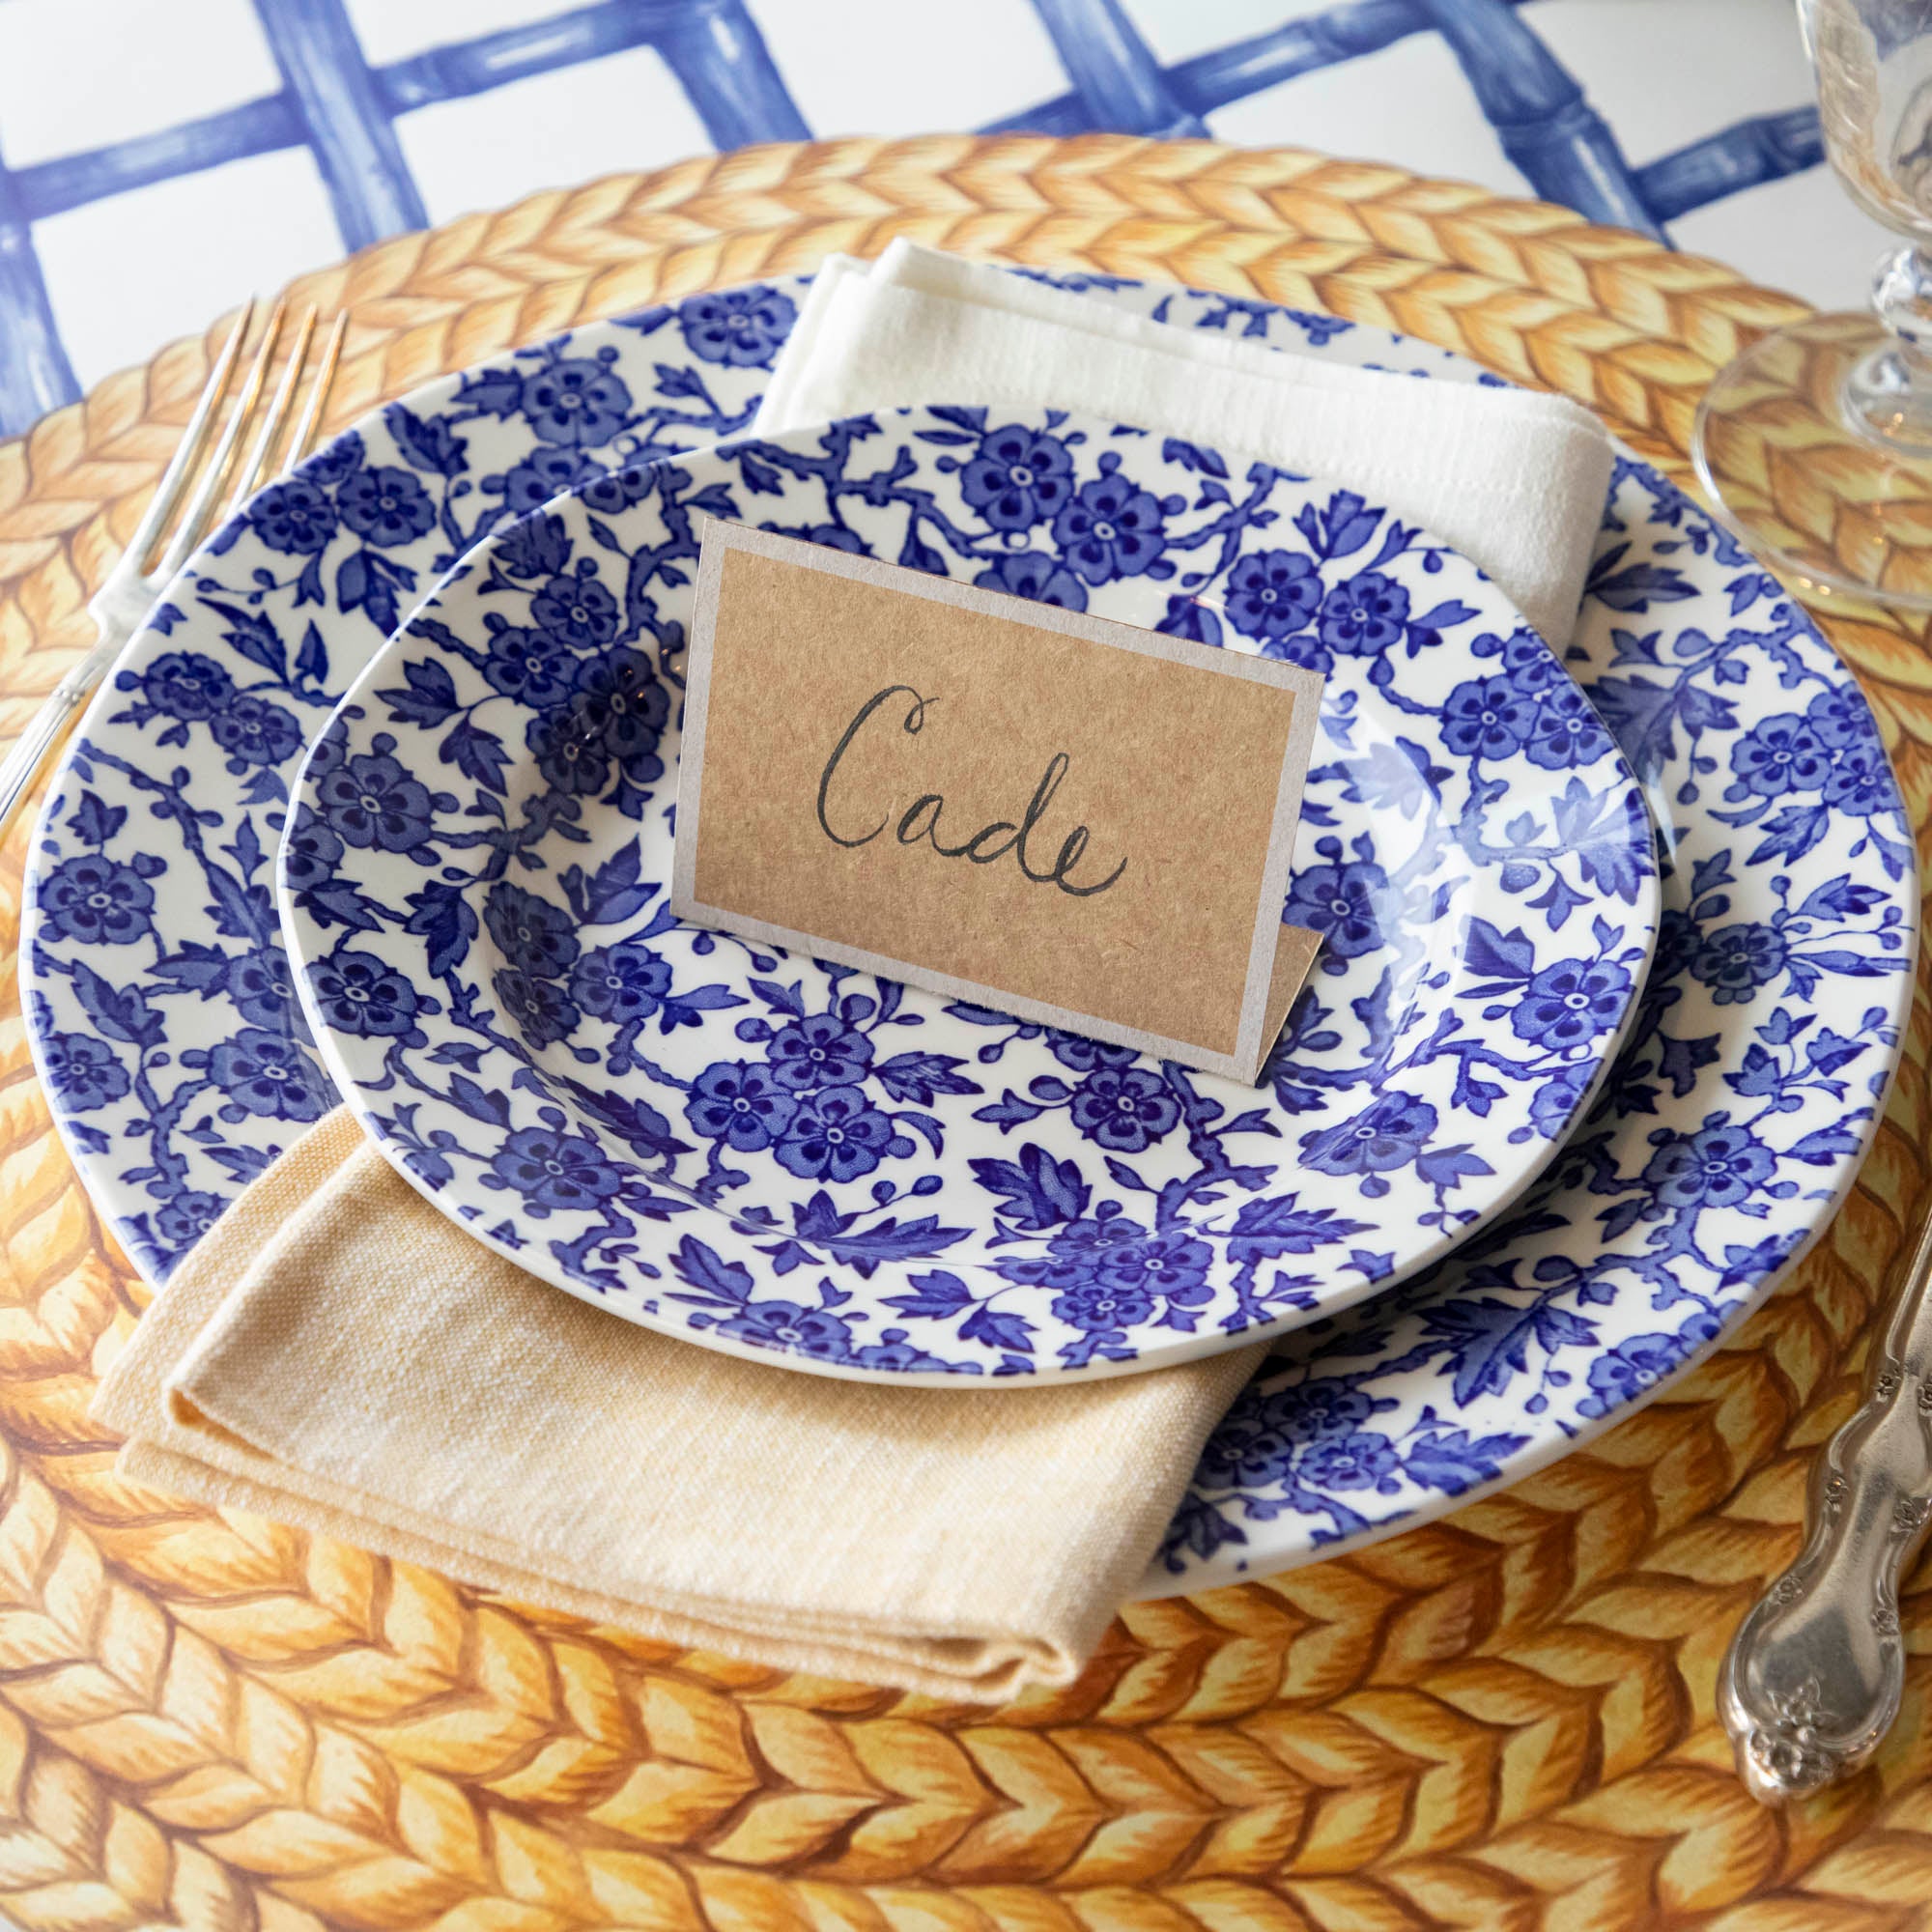 A Burleigh Blue Arden dinnerware plate on a wicker placemat with a folded napkin and a fork to the side, also noted as dishwasher safe.